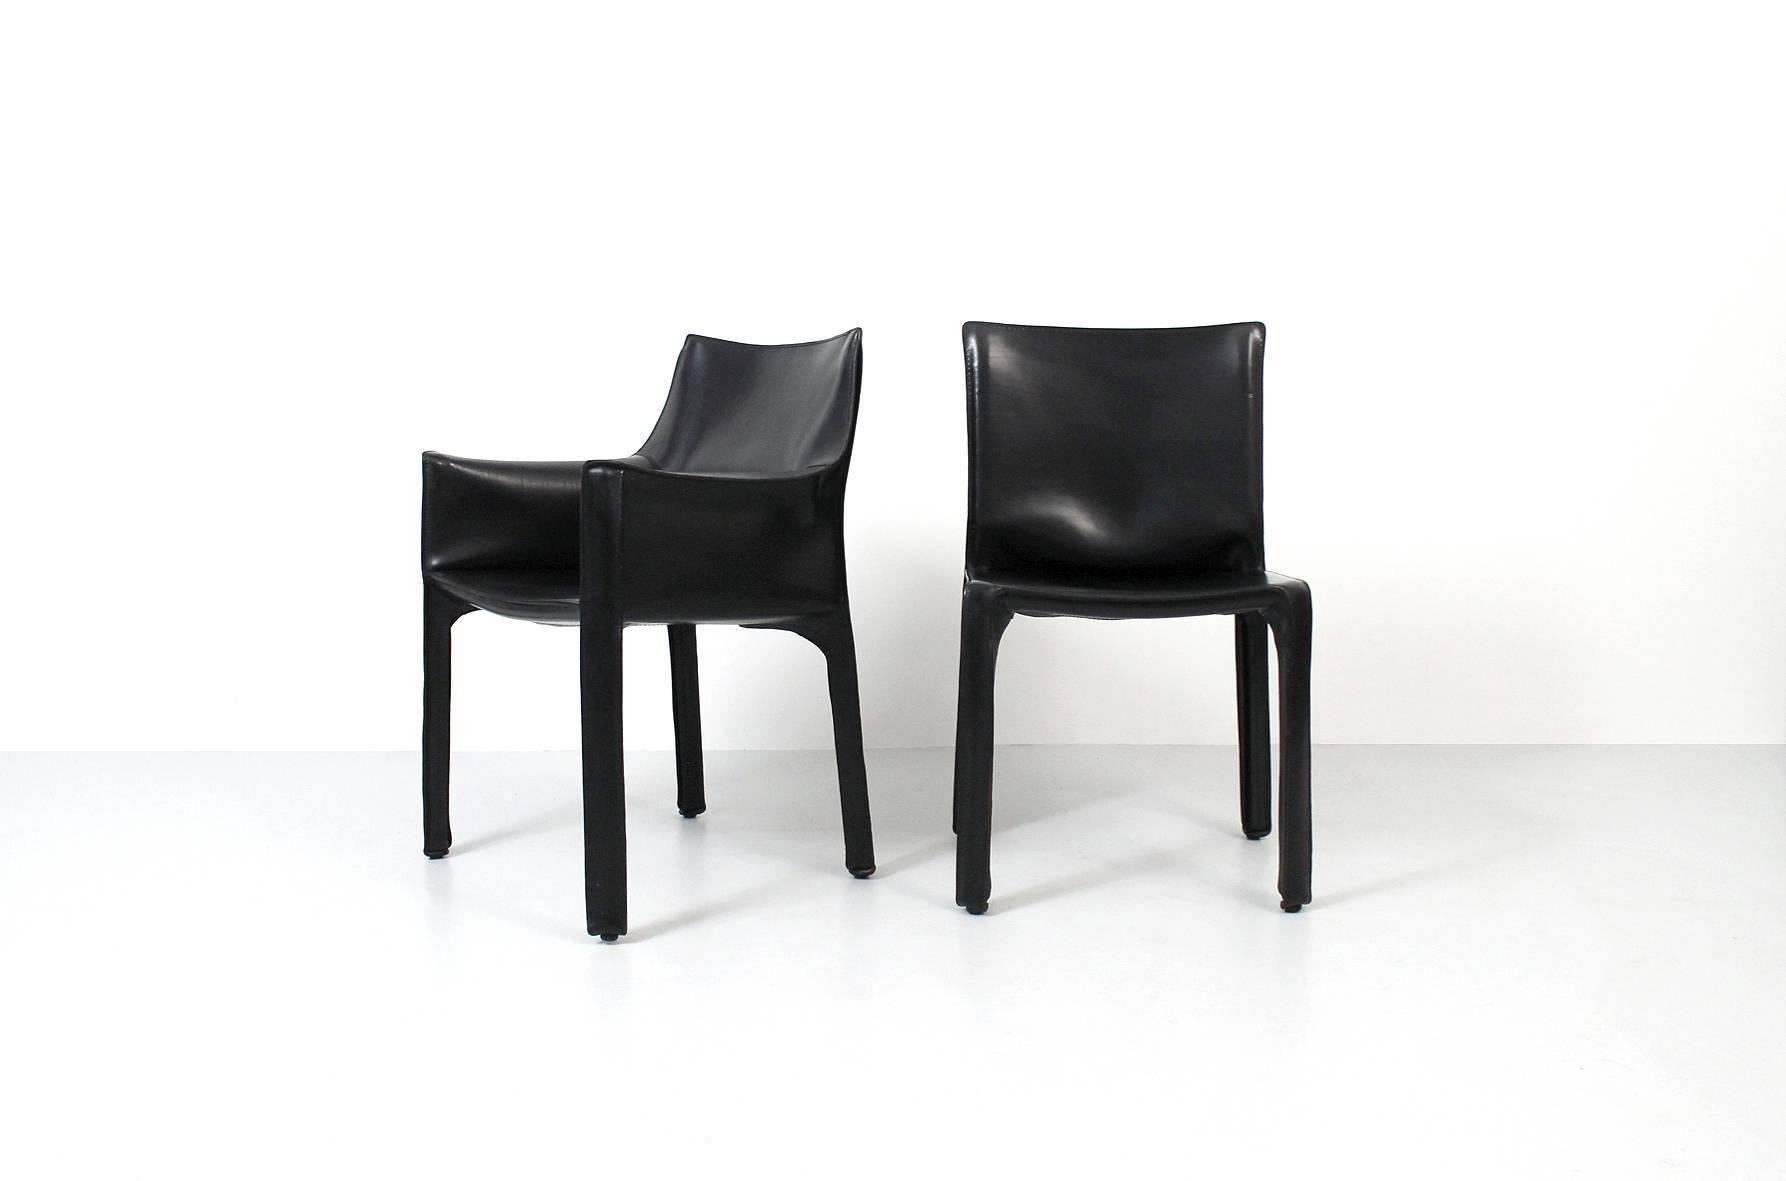 Eight CAB dining chairs by Italian designer Mario Bellini for Cassina. This set comprised of six sides and two arms. These vintage examples of the popular chairs are in black belting leather. Marked with impressed Cassina brand and Atelier